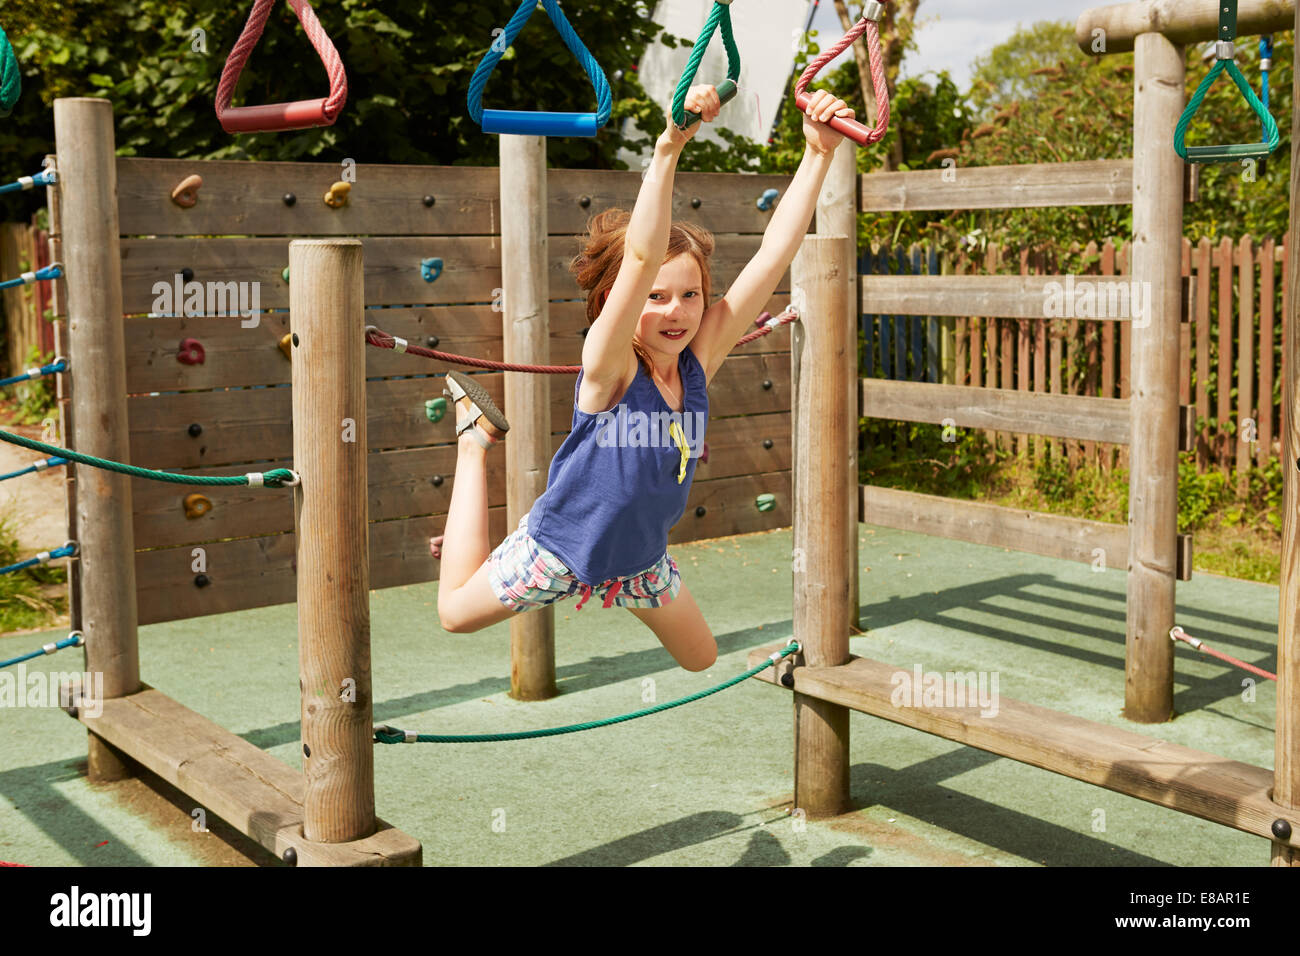 Girl energetically playing on swings in playground Stock Photo